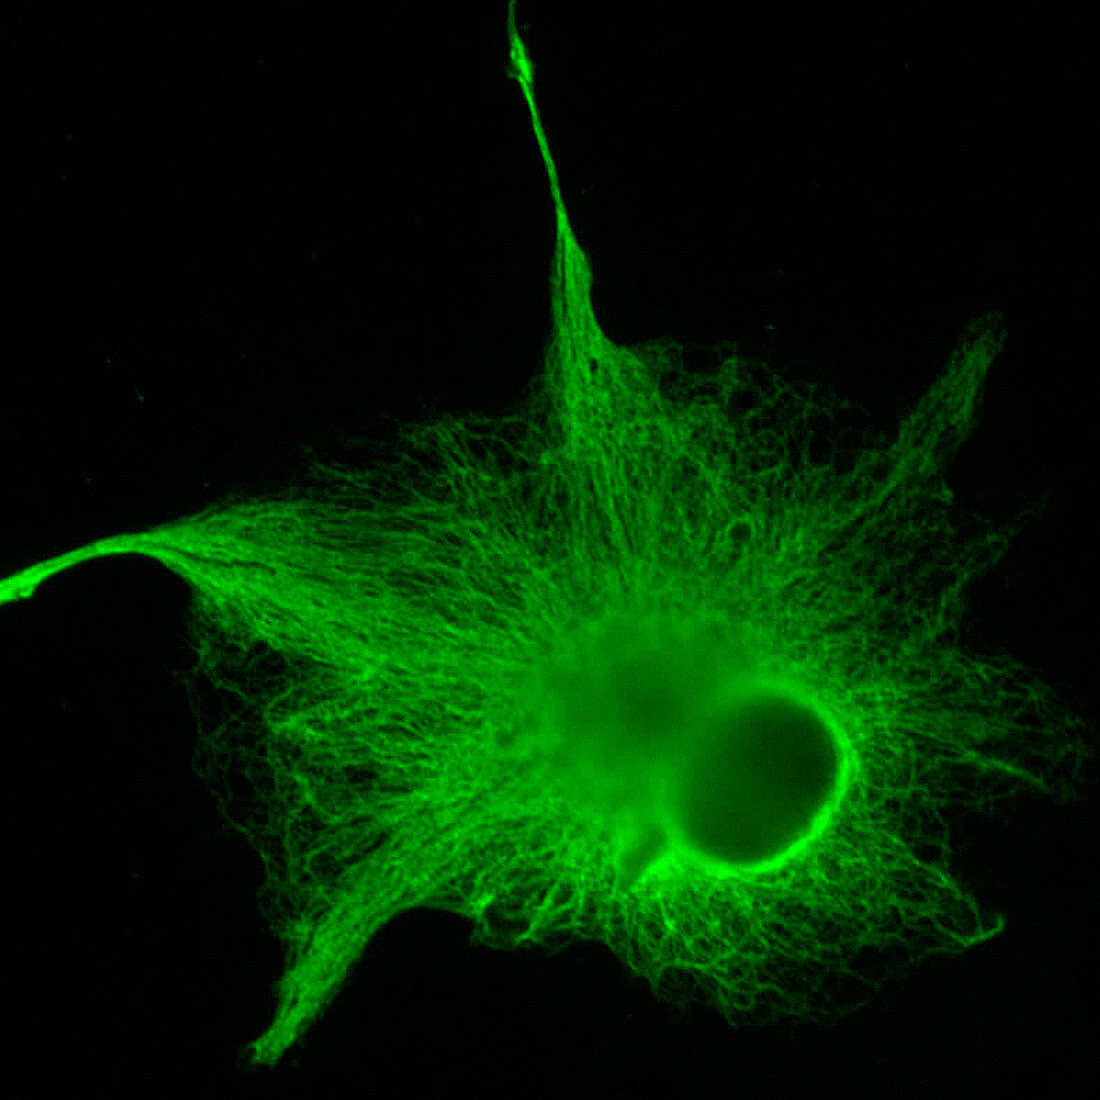 Astrocyte nerve cell